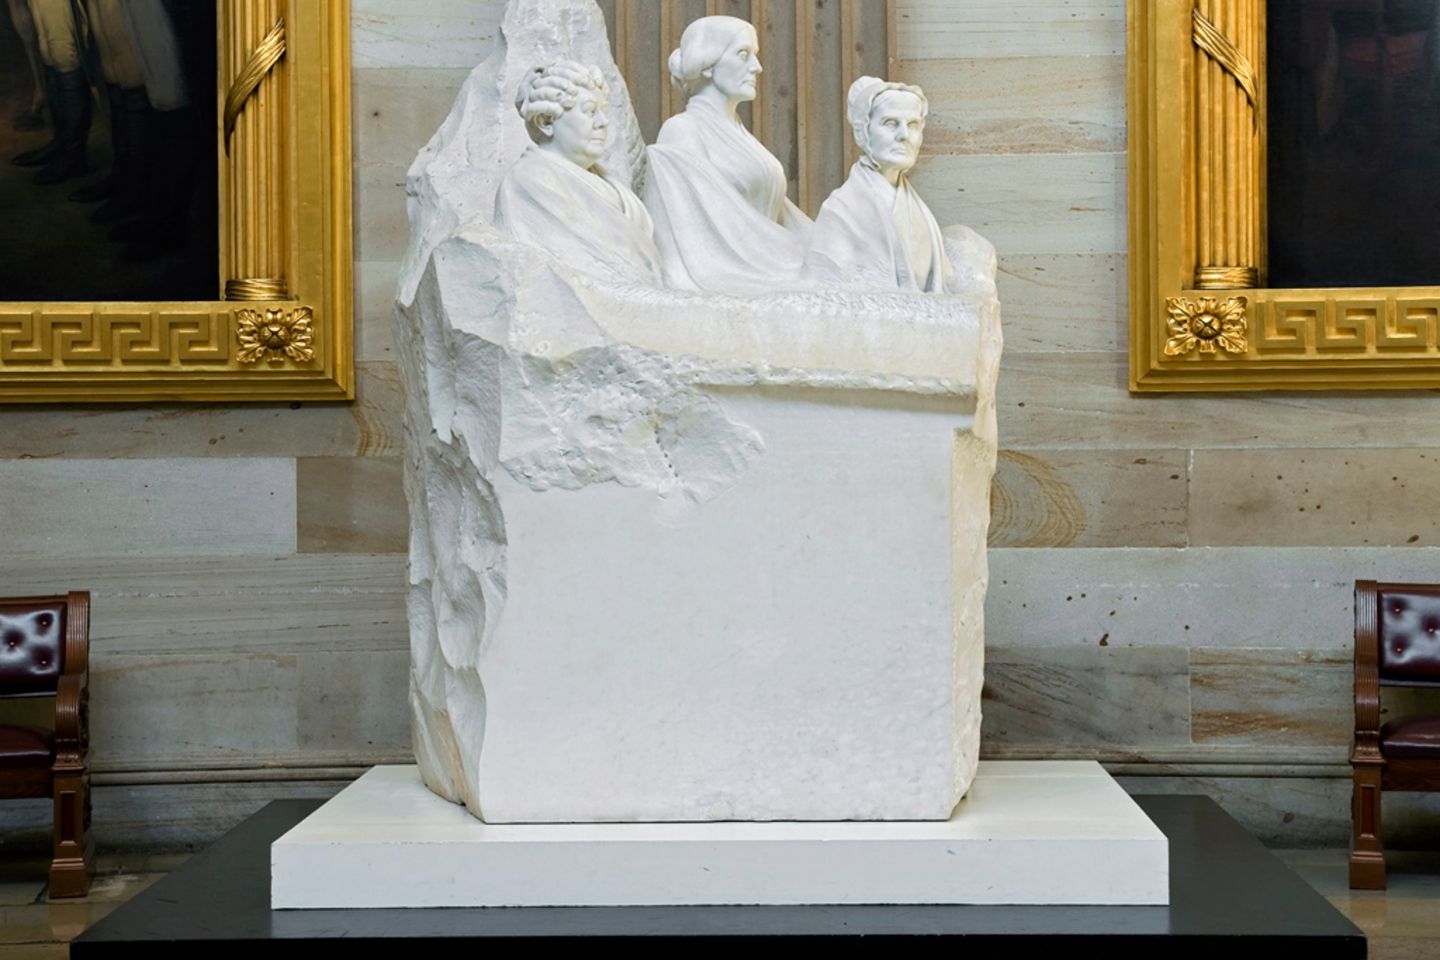 Women's rights heroines are commemorated in this sculpture in the Rotunda of the U.S. Capitol.